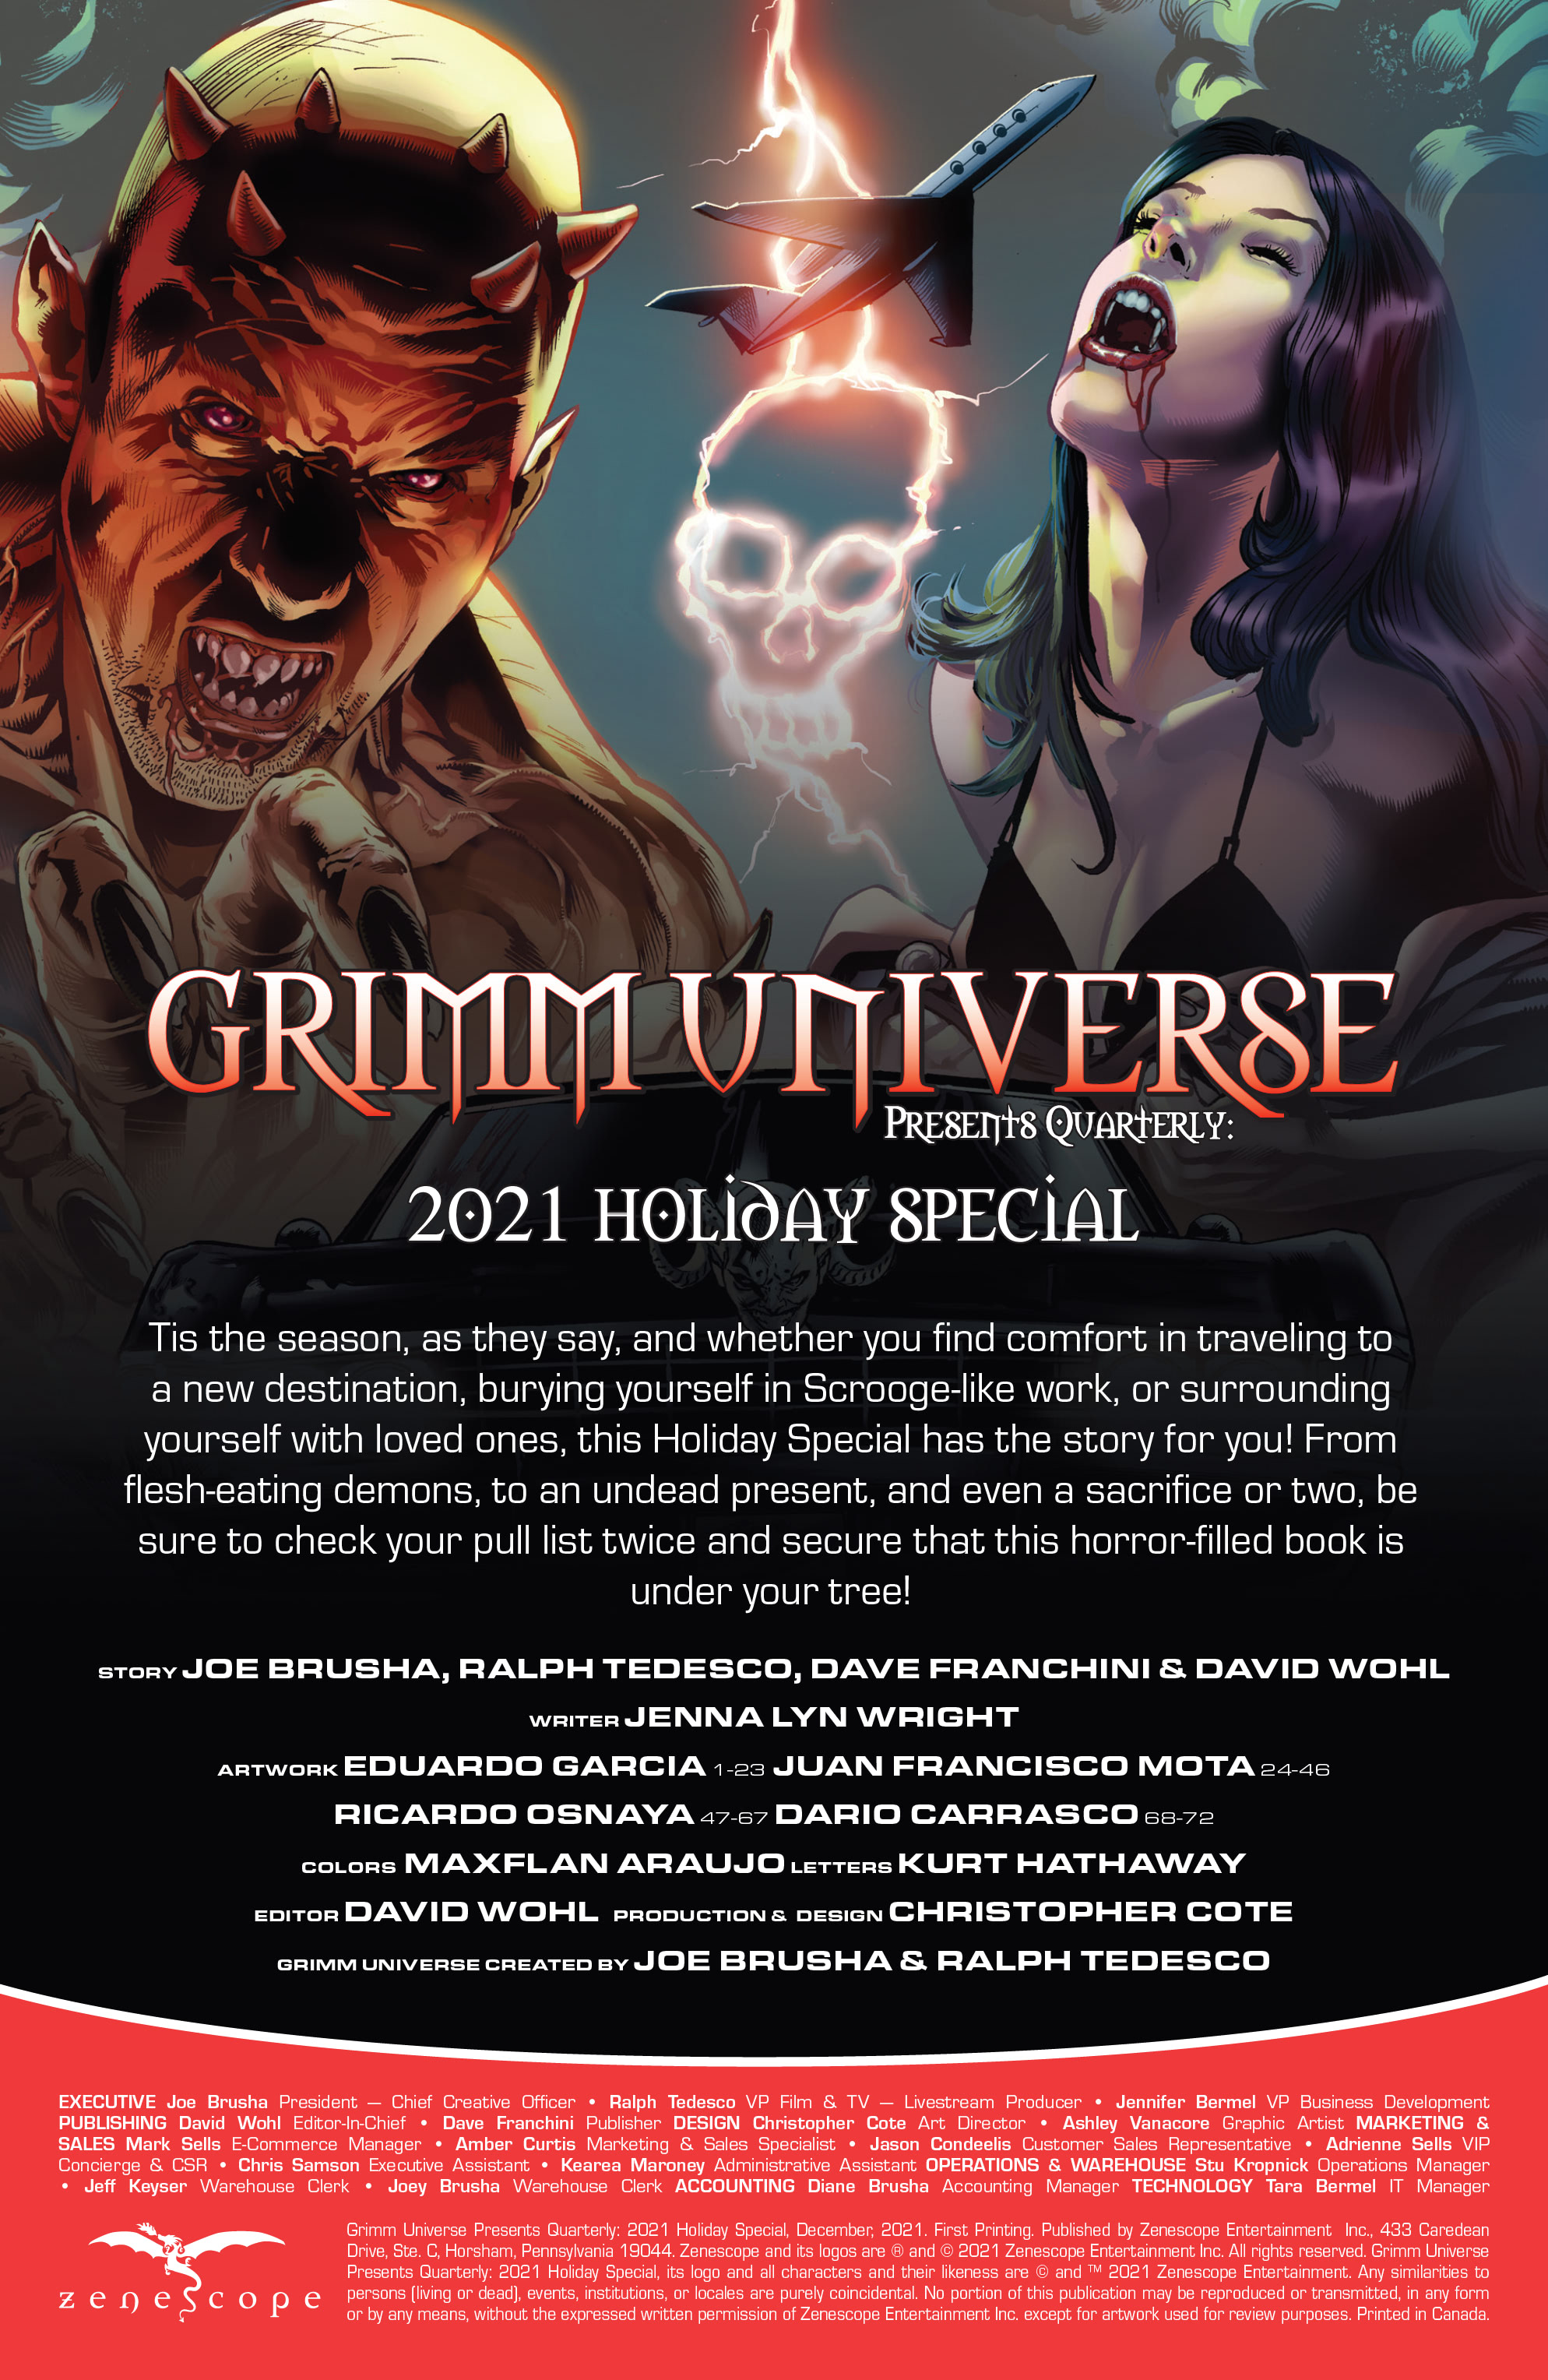 Grimm Universe Presents Quarterly: 2021 Holiday Special (2021): Chapter 1 - Page 2